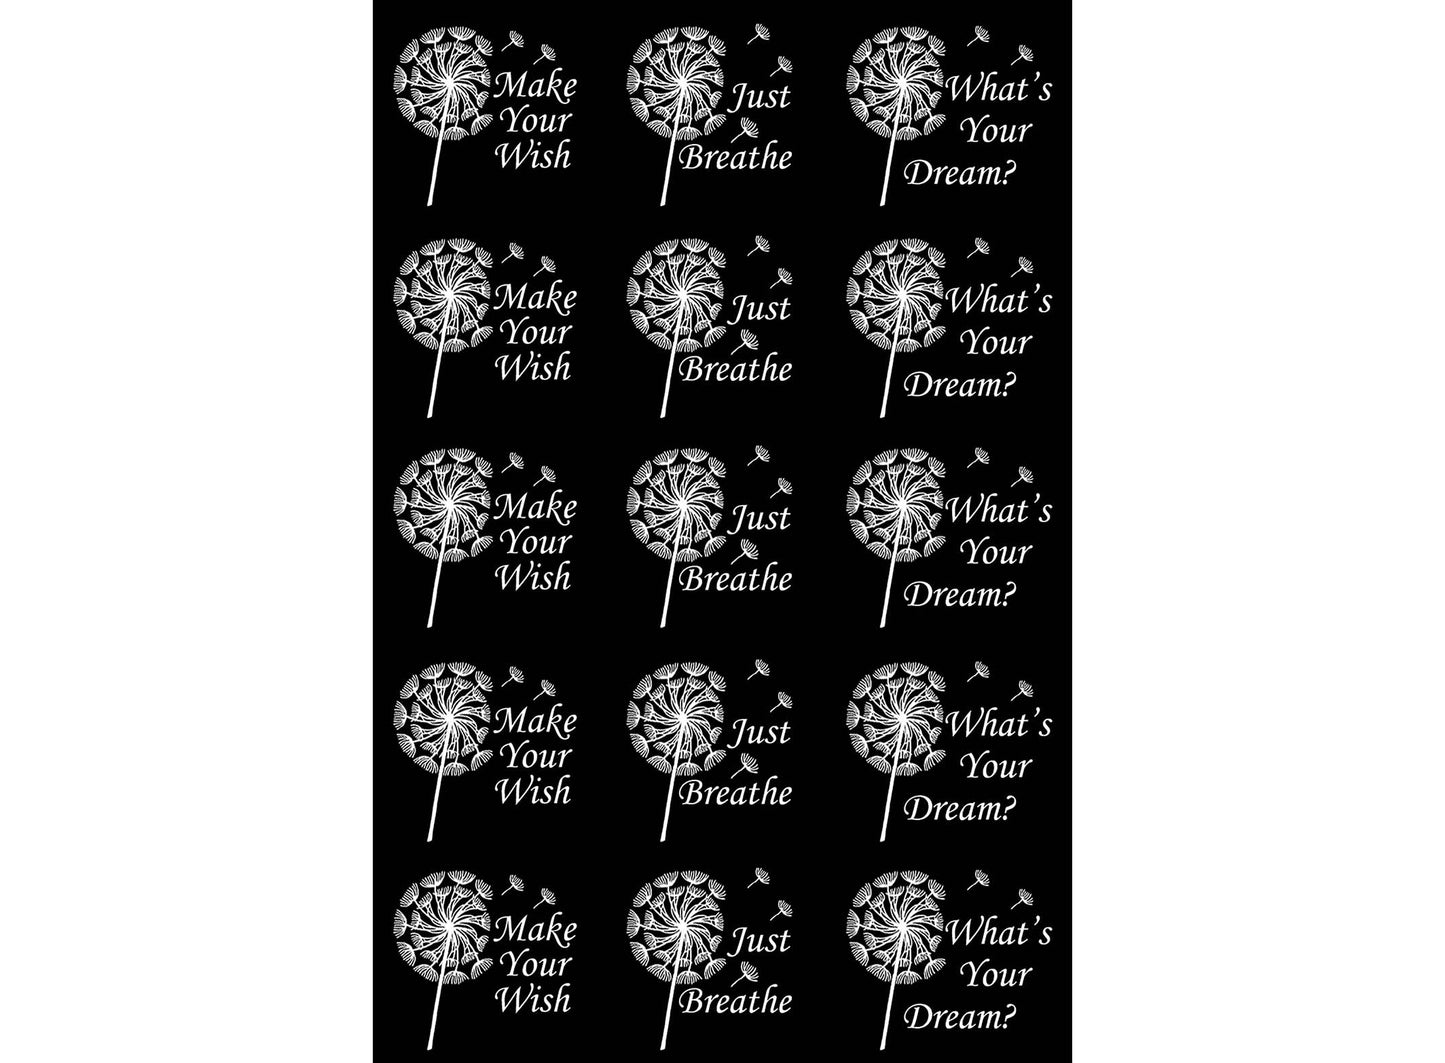 Dandelion Wishes 15 pcs 1" White Fused Glass Decals